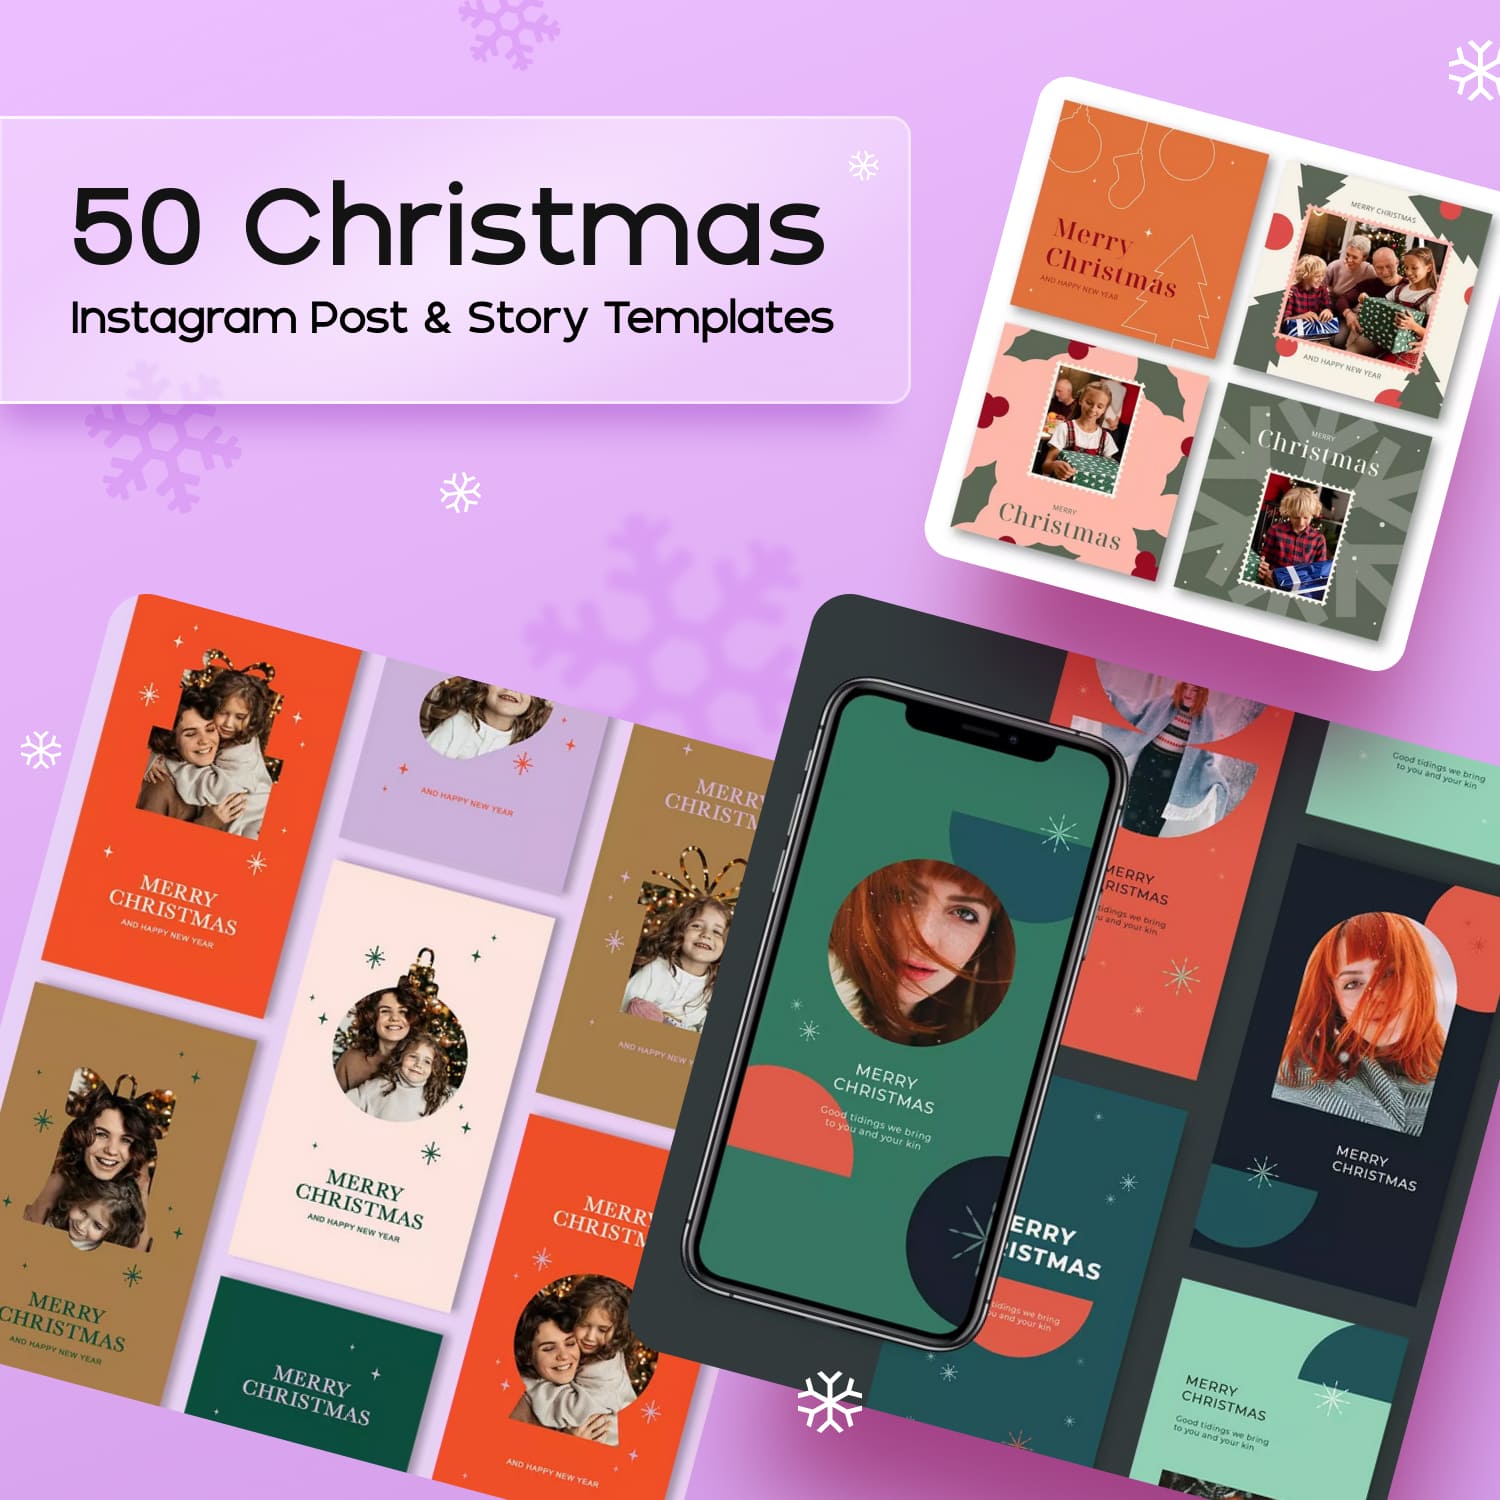 50 Christmas Instagram Post & Story Templates.